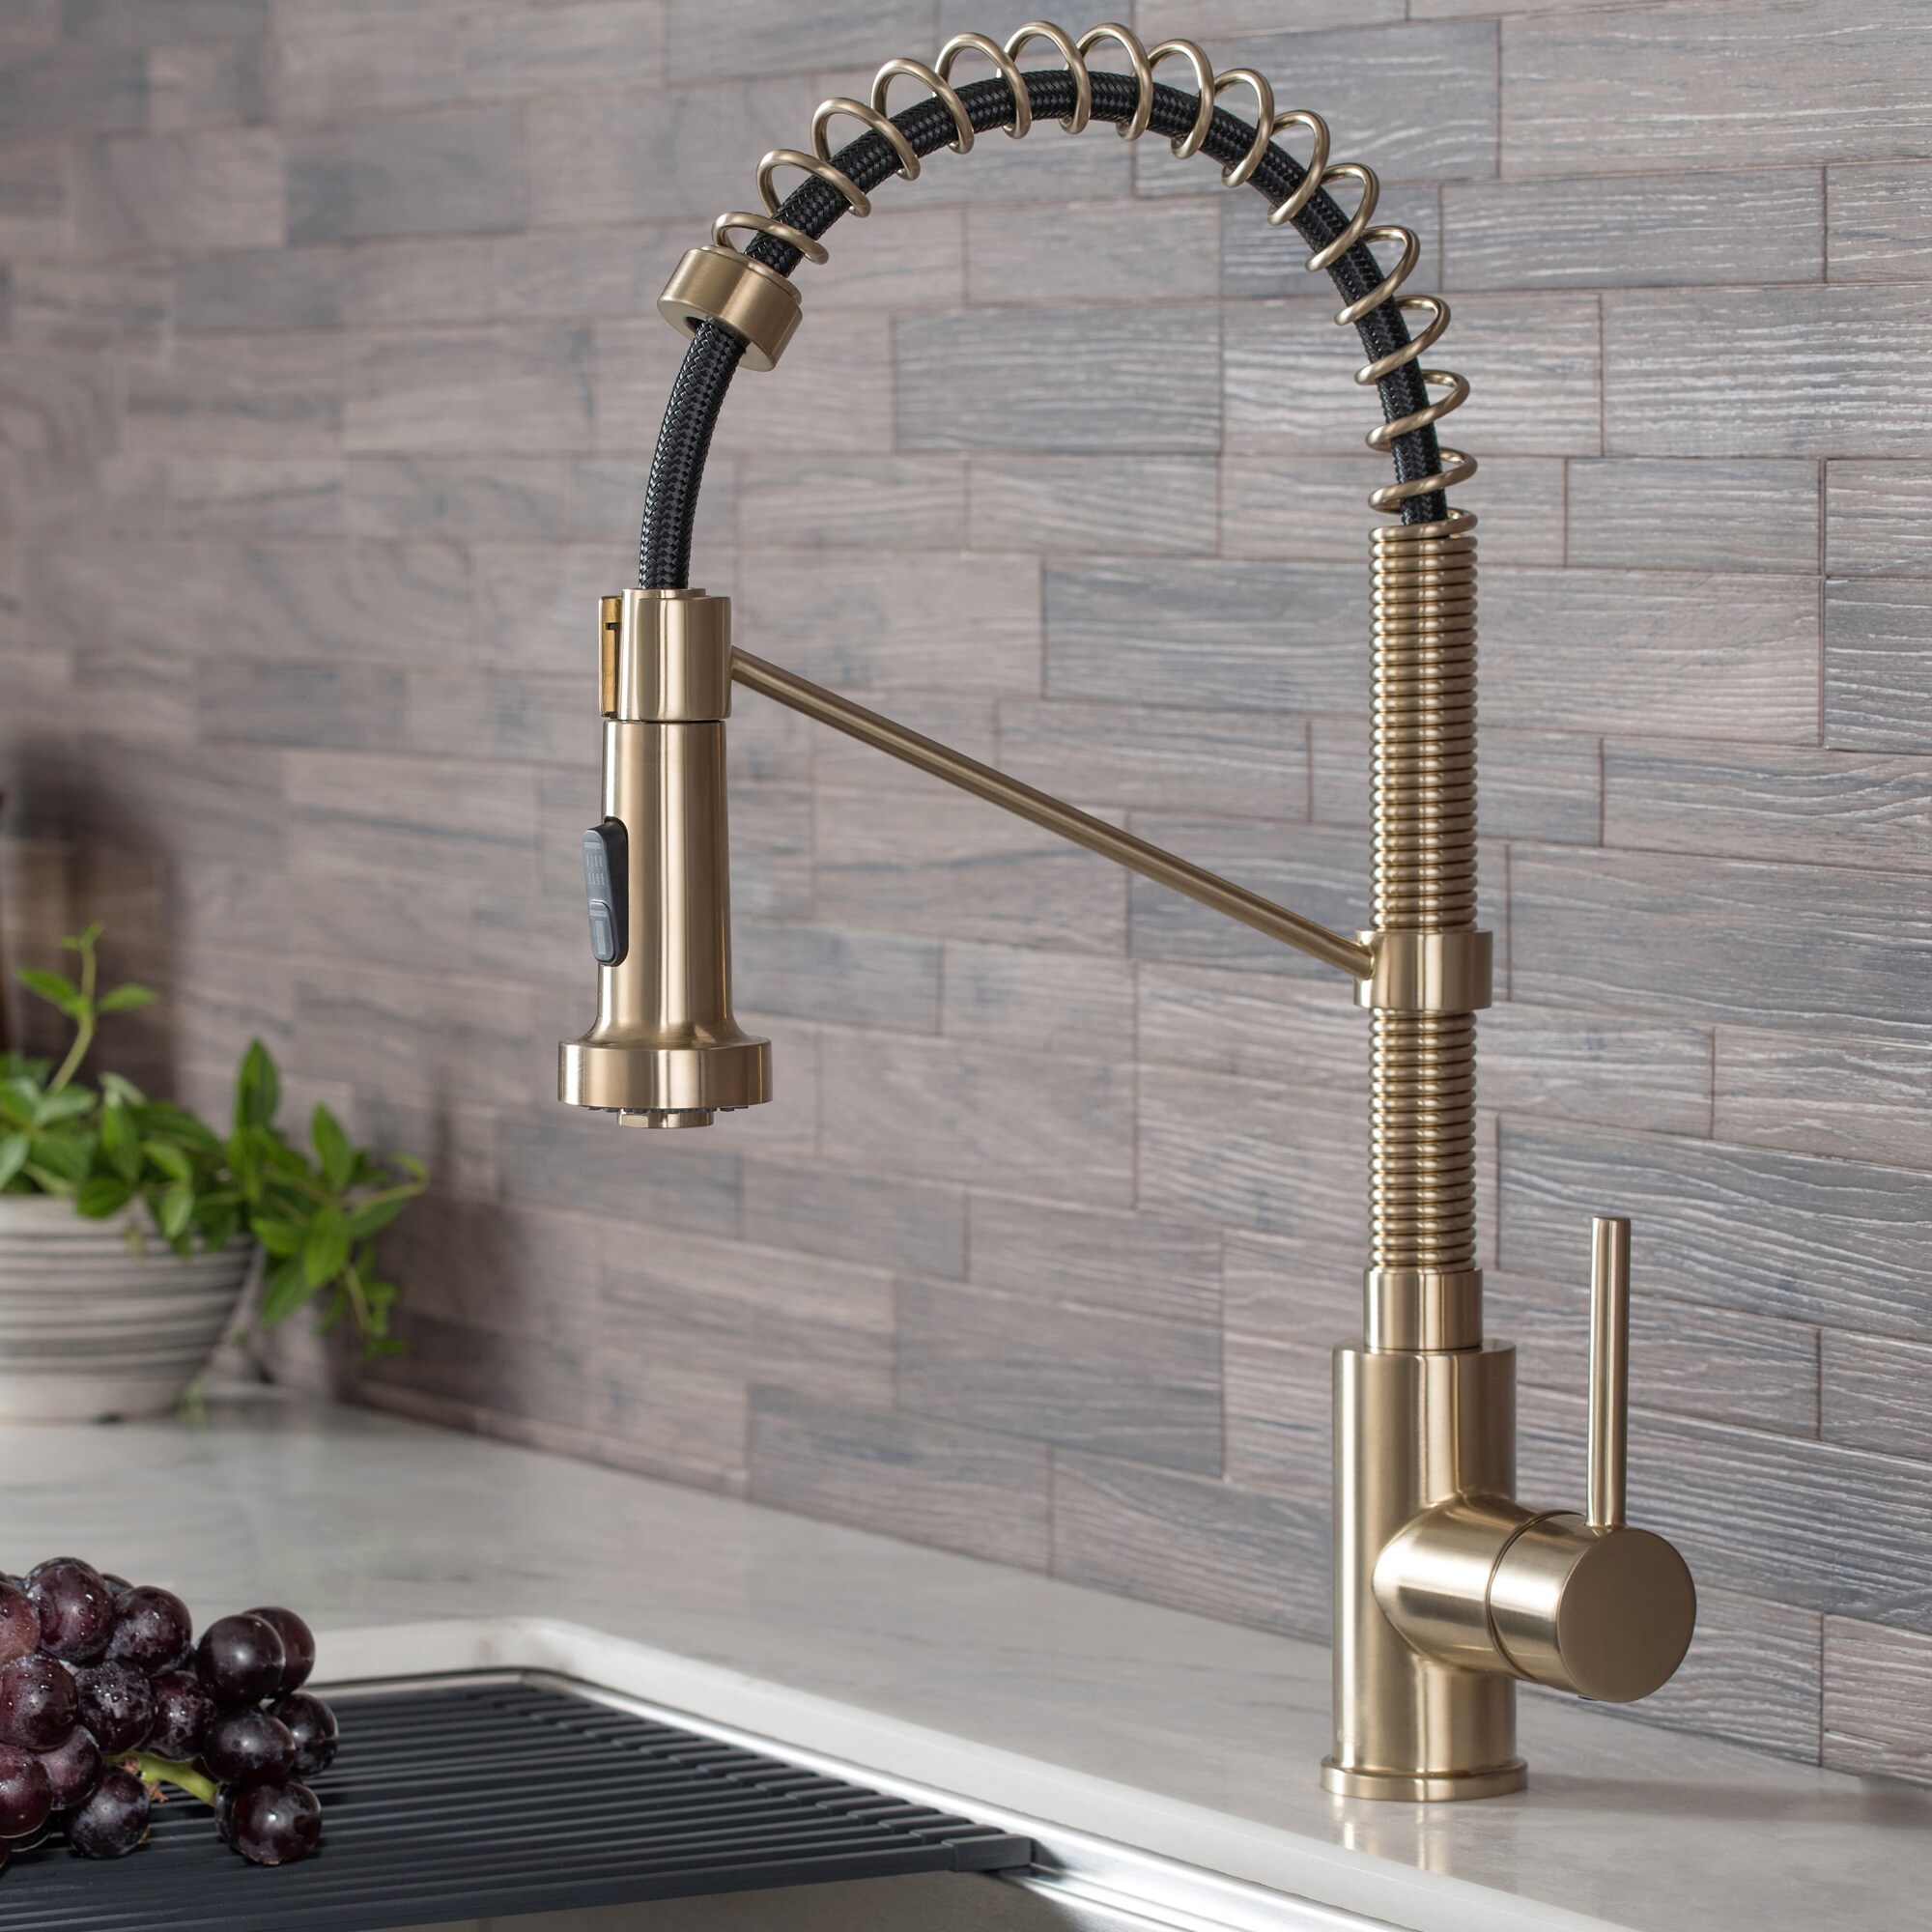 Kraus Gold Kitchen Faucets at Lowes.com